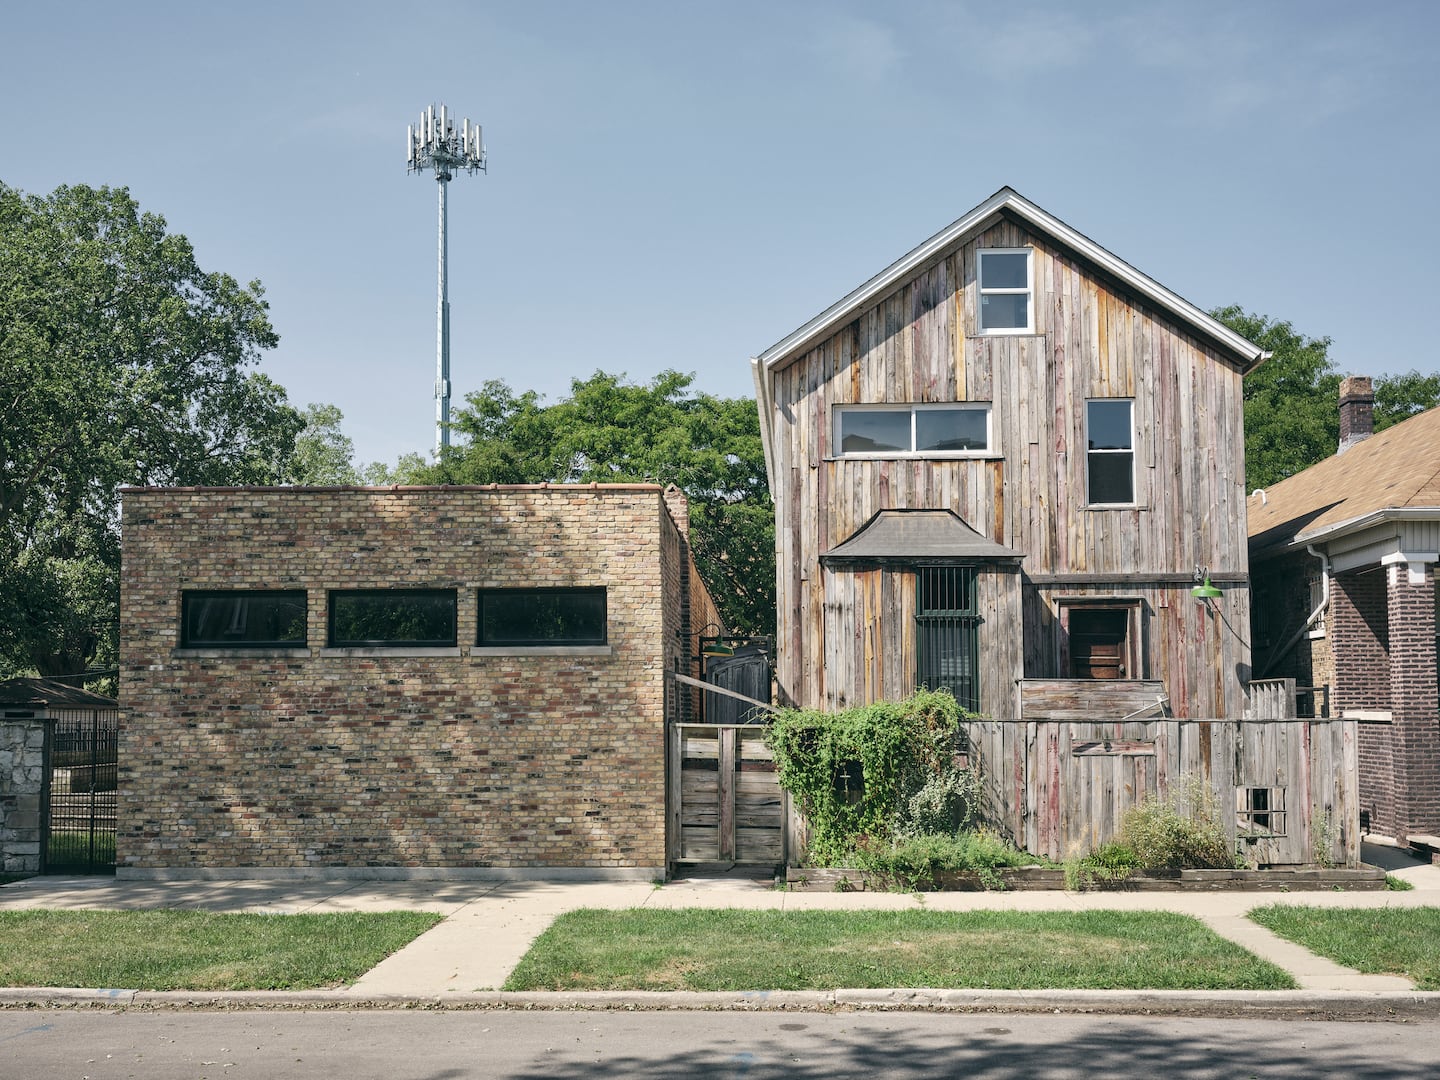 Prada and Theaster Gates are co-founding an "experimental design lab" in Chicago's South Side. Courtesy.